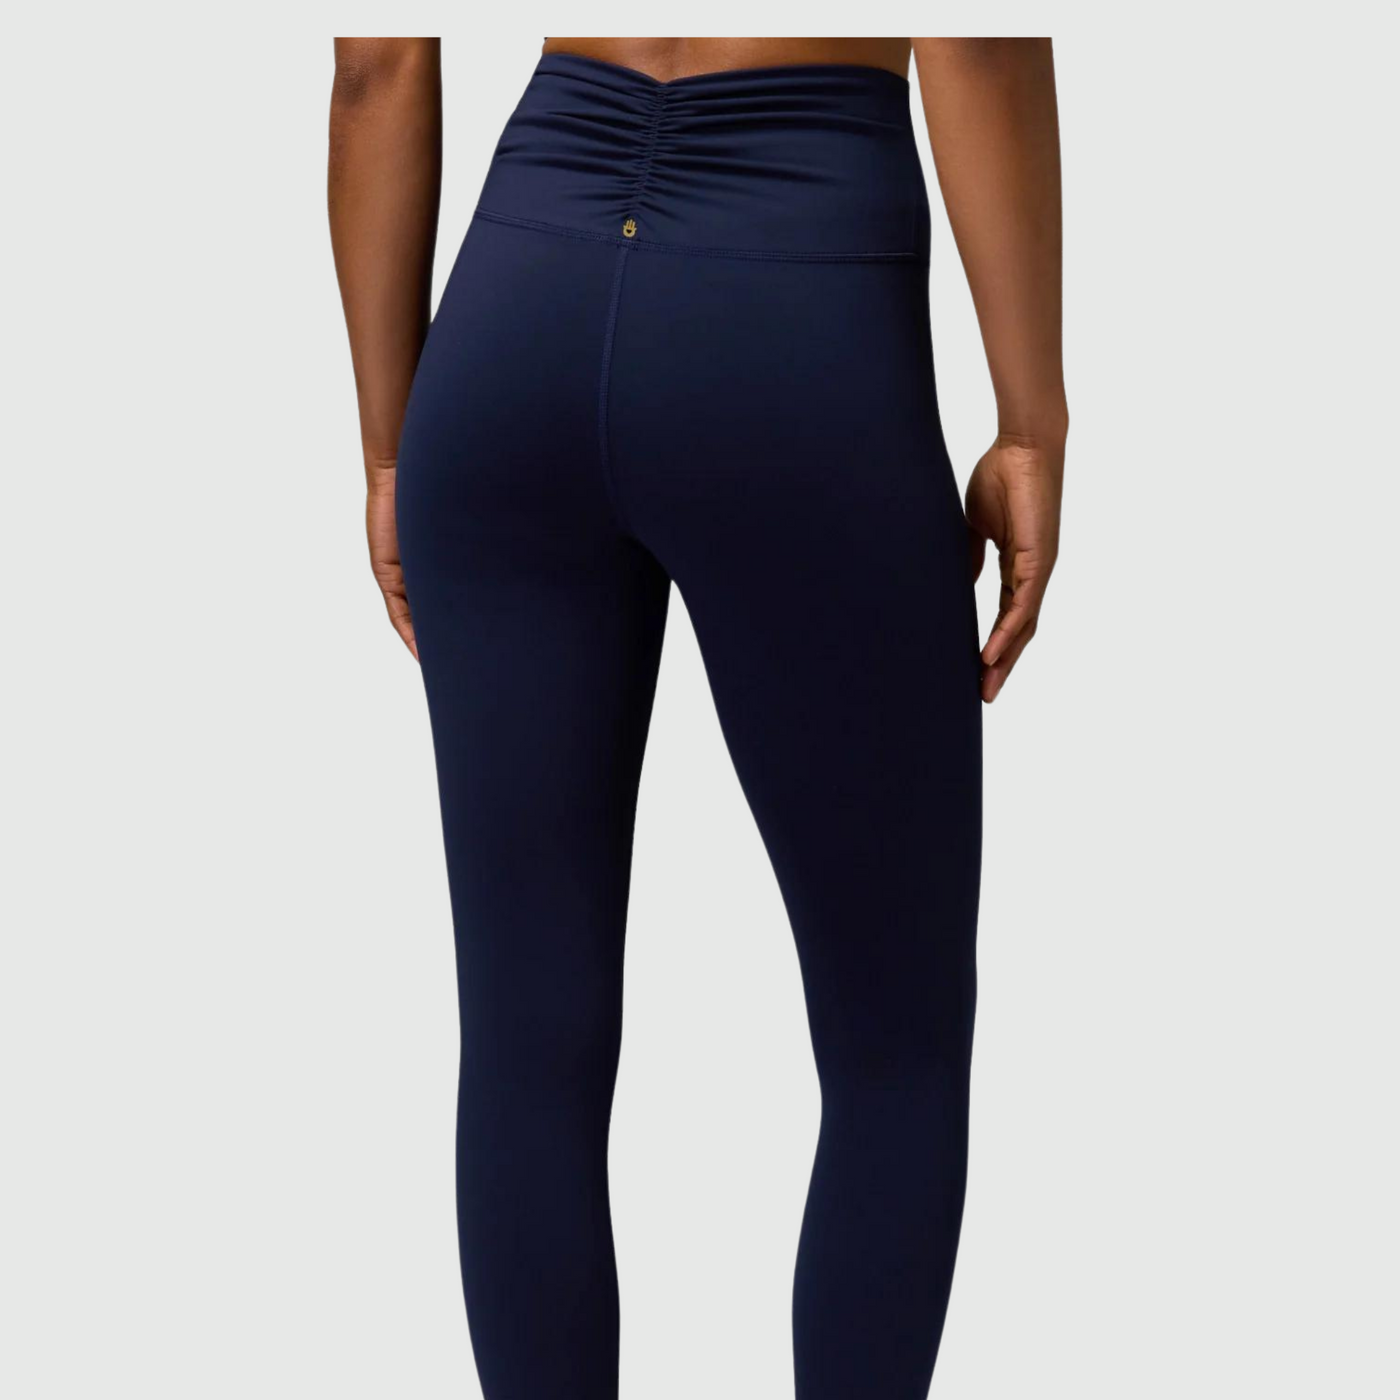 Spiritual Gangster Everly Cinched Waist Legging in Midnight Navy